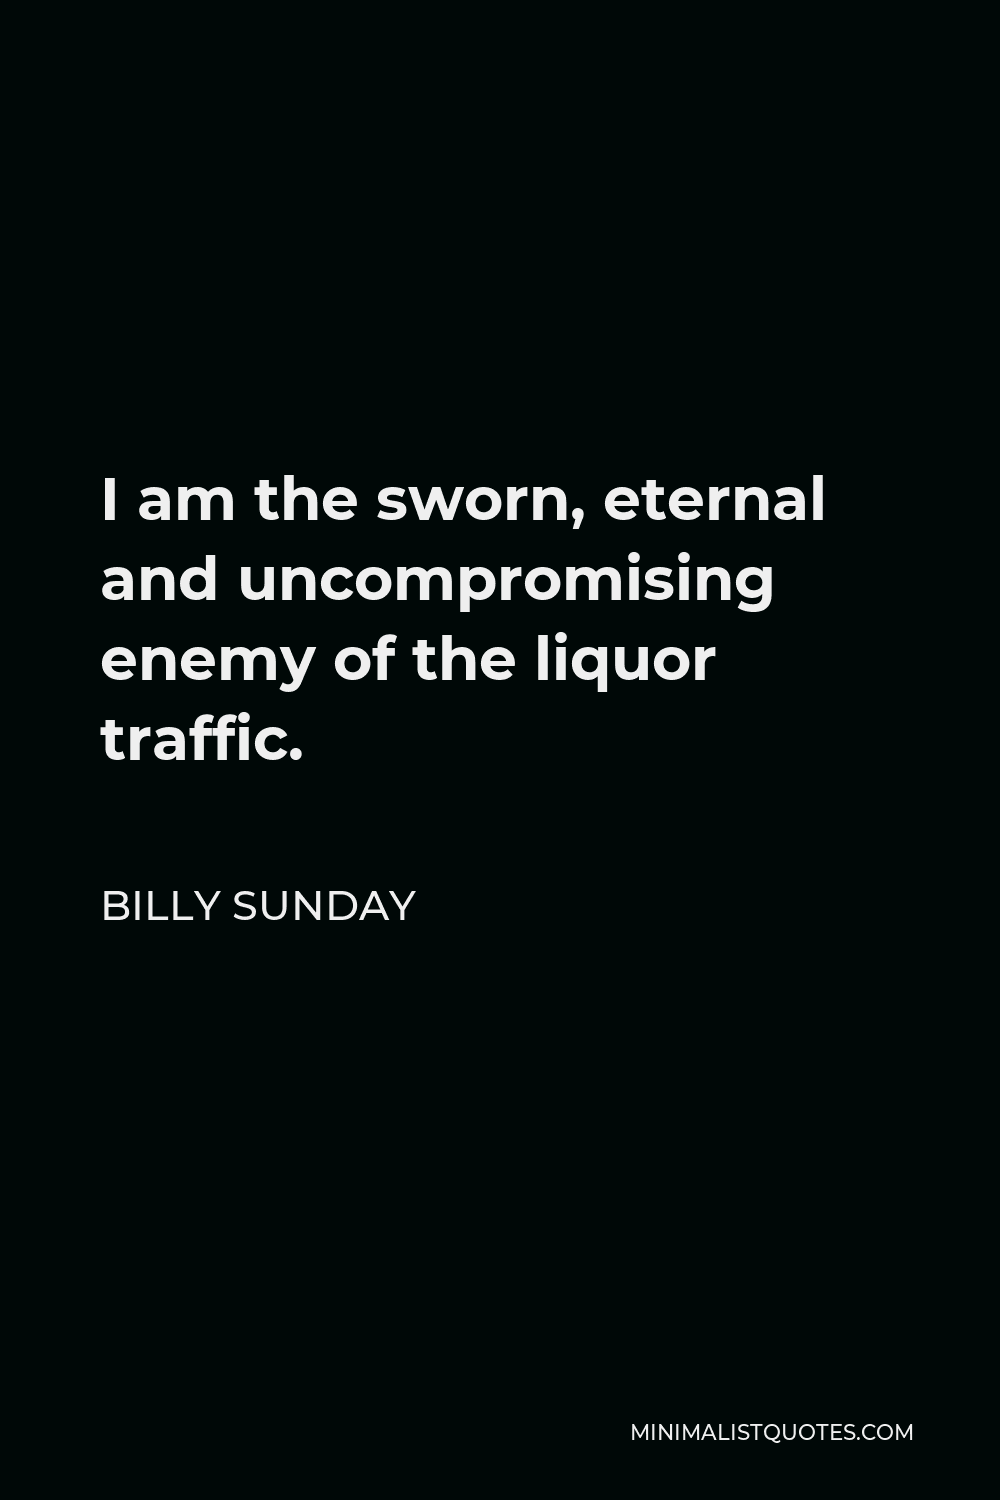 Billy Sunday Quote - I am the sworn, eternal and uncompromising enemy of the liquor traffic.